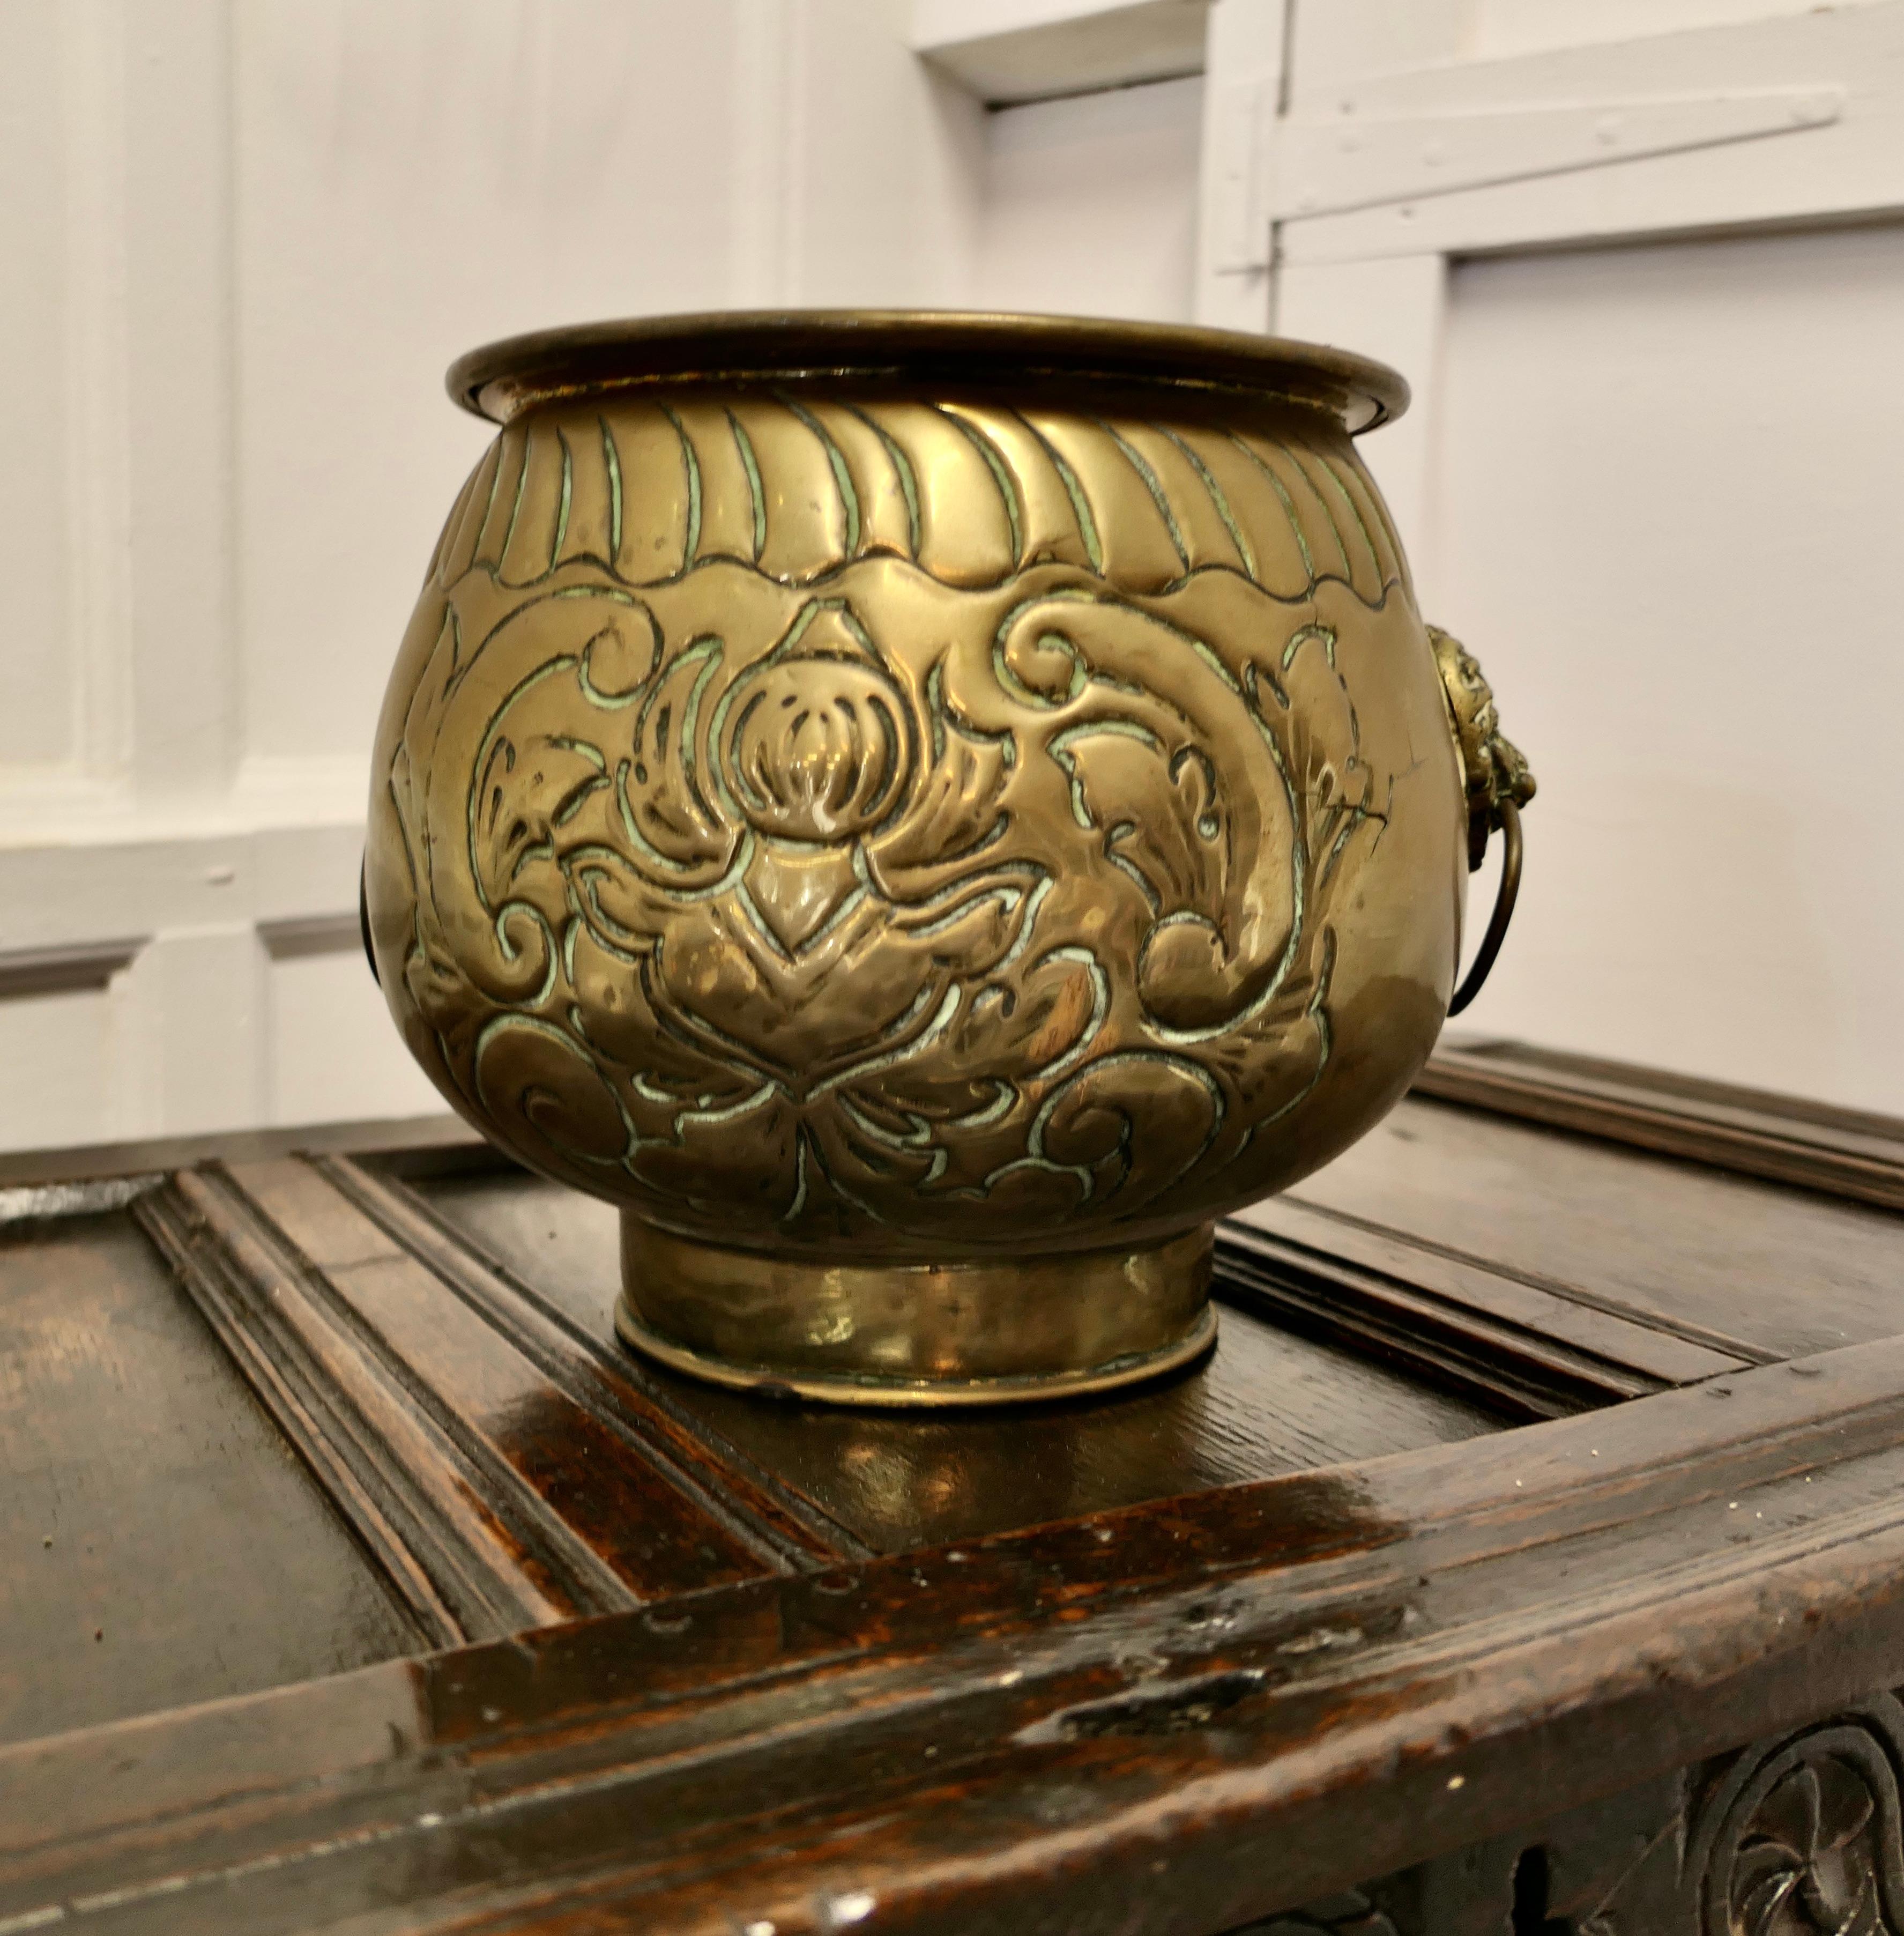 Large Victorian Brass Jardinière, Lions Mask Planter

This a good quality piece of solid brass craftsmanship, the Jardinière has a rolled top edge and lions mask ring handles
There is a decorative Coat of Arms  on the front of the container